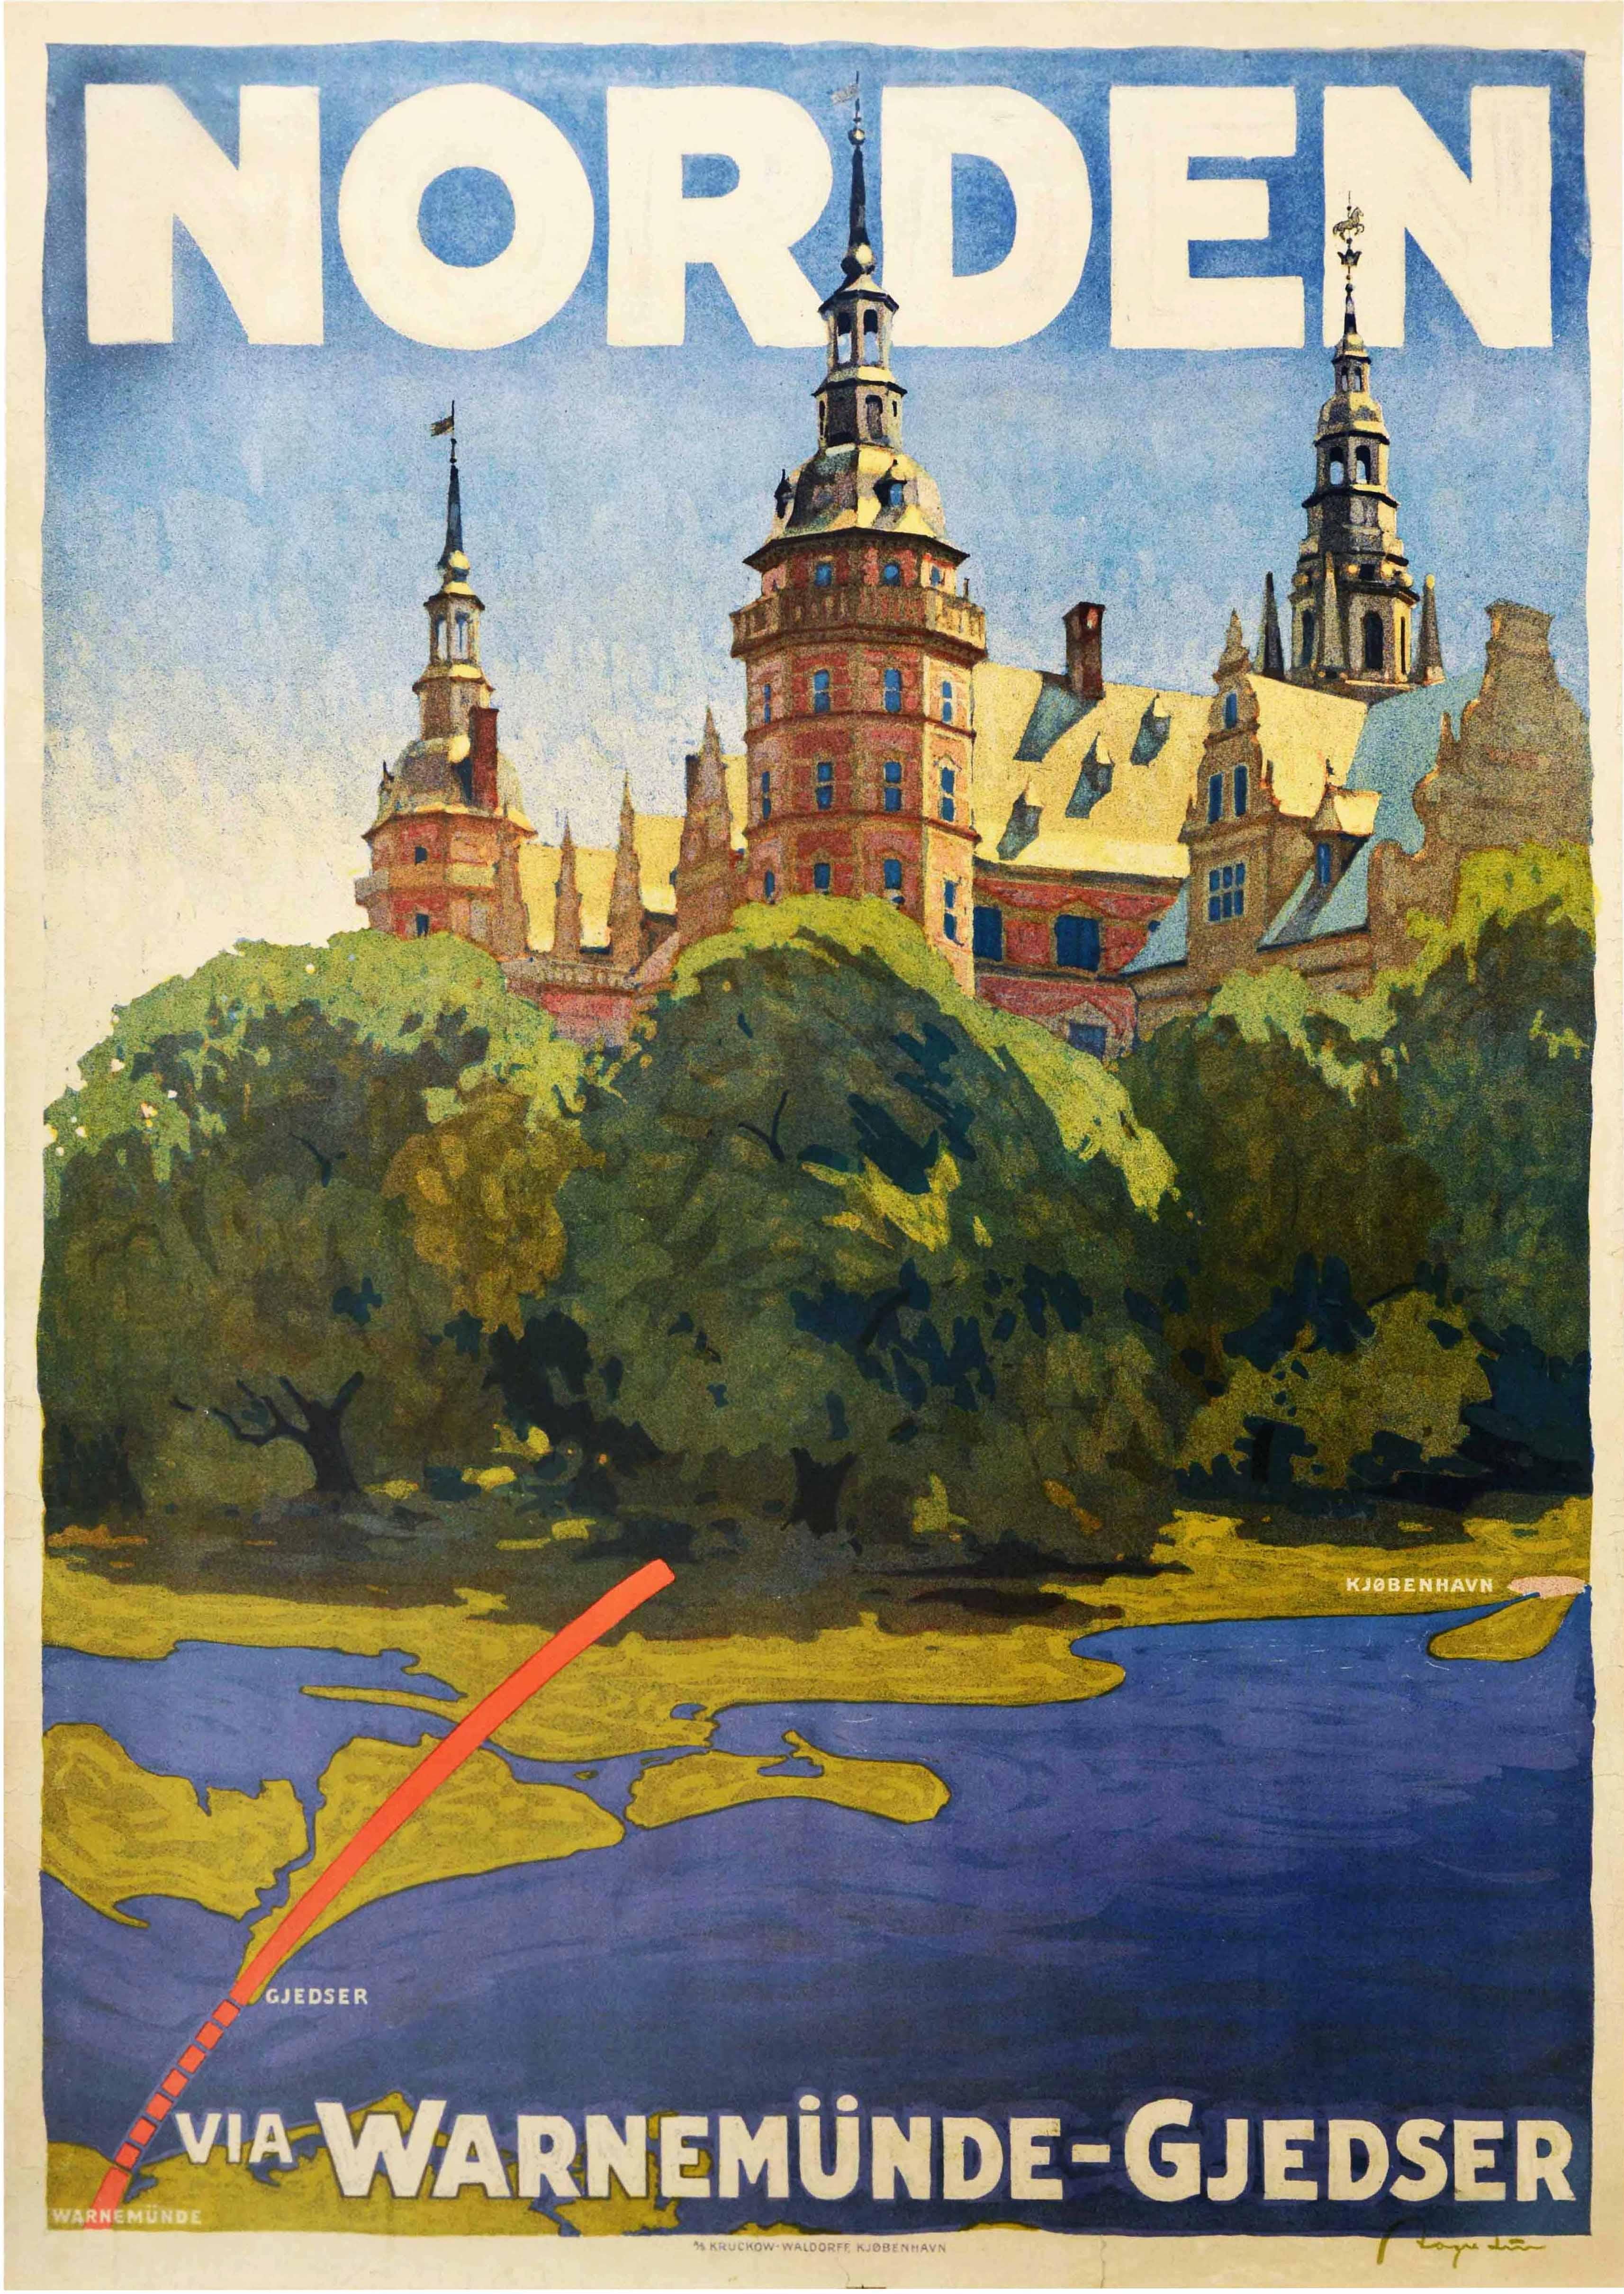 Original vintage travel map poster featuring an illustration by the Danish artist Aage Lund (1892-1972) showing the ferry route linking the towns of Gjedser / Gedser in Denmark and Warnemunde in Germany depicting the historic Kronborg castle with